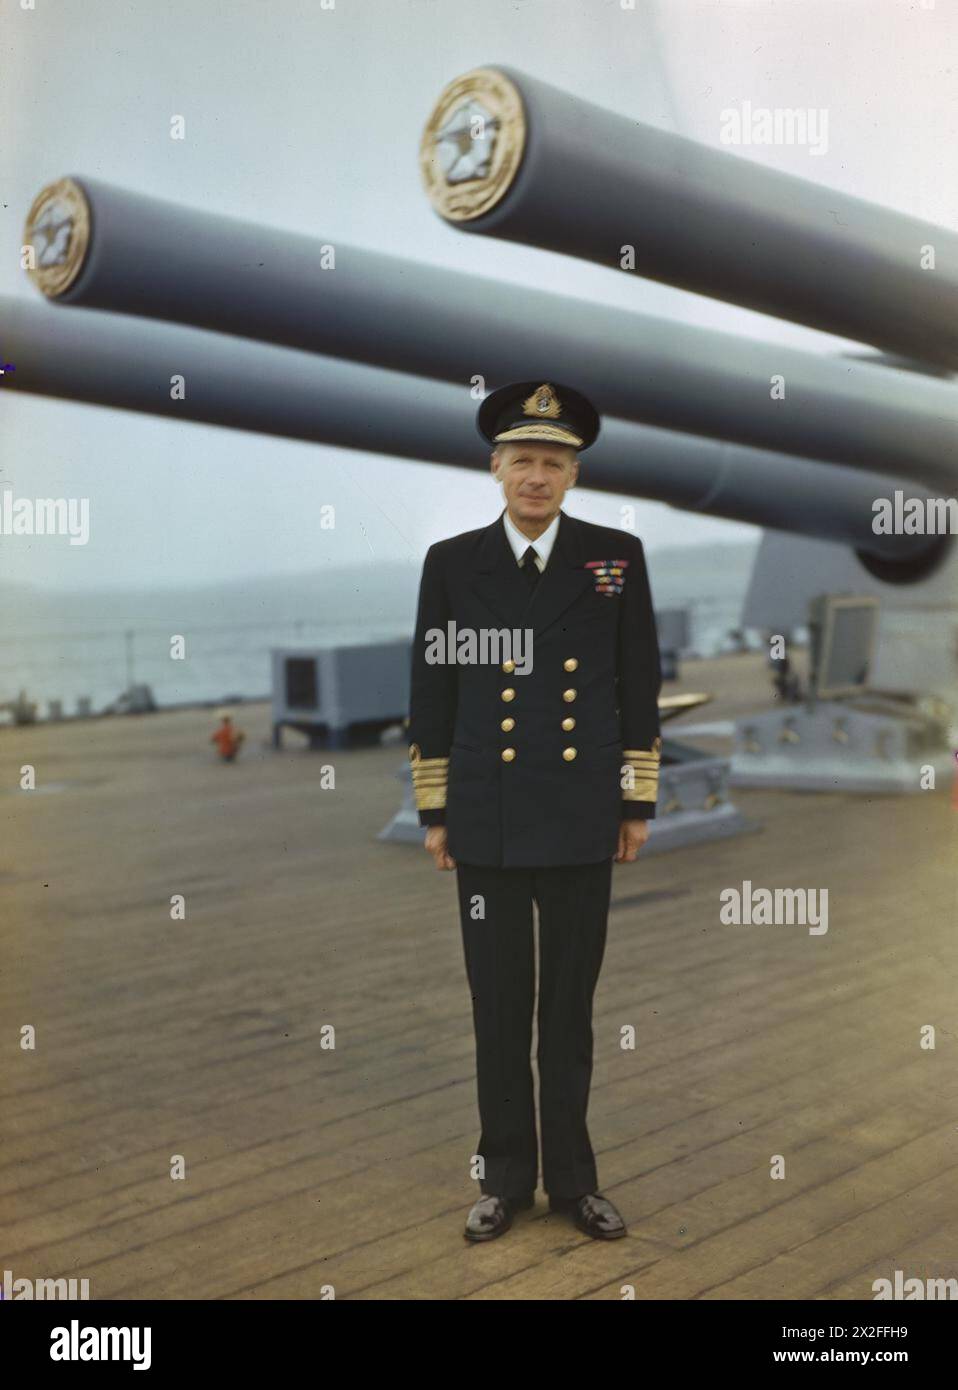 THE ROYAL NAVY DURING THE SECOND WORLD WAR: PERSONALITIES - Full length portrait of Admiral Sir Henry Ruthven Moore KCB, CVO, DSO, Commander in Chief Home Fleet, under the guns of his flagship HMS DUKE OF YORK at Scapa Flow Moore, Henry Ruthven, Royal Navy Stock Photo